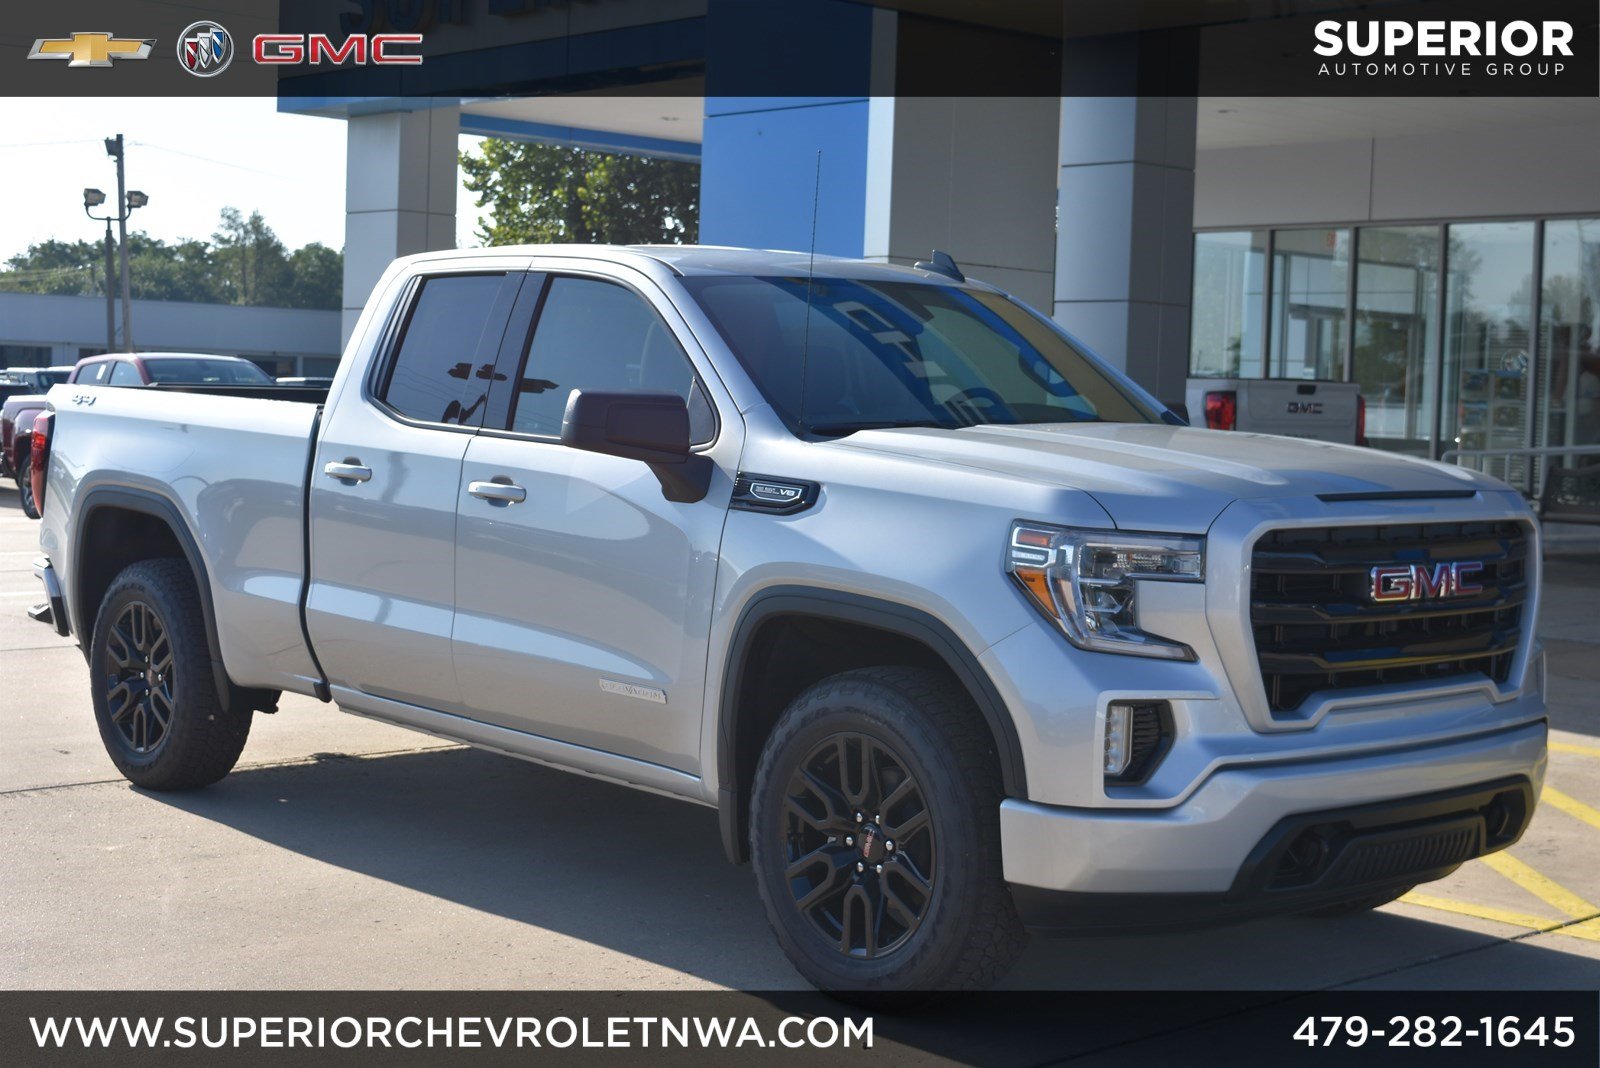 New 2019 Gmc Sierra 1500 Elevation 4wd Double Cab 4wd